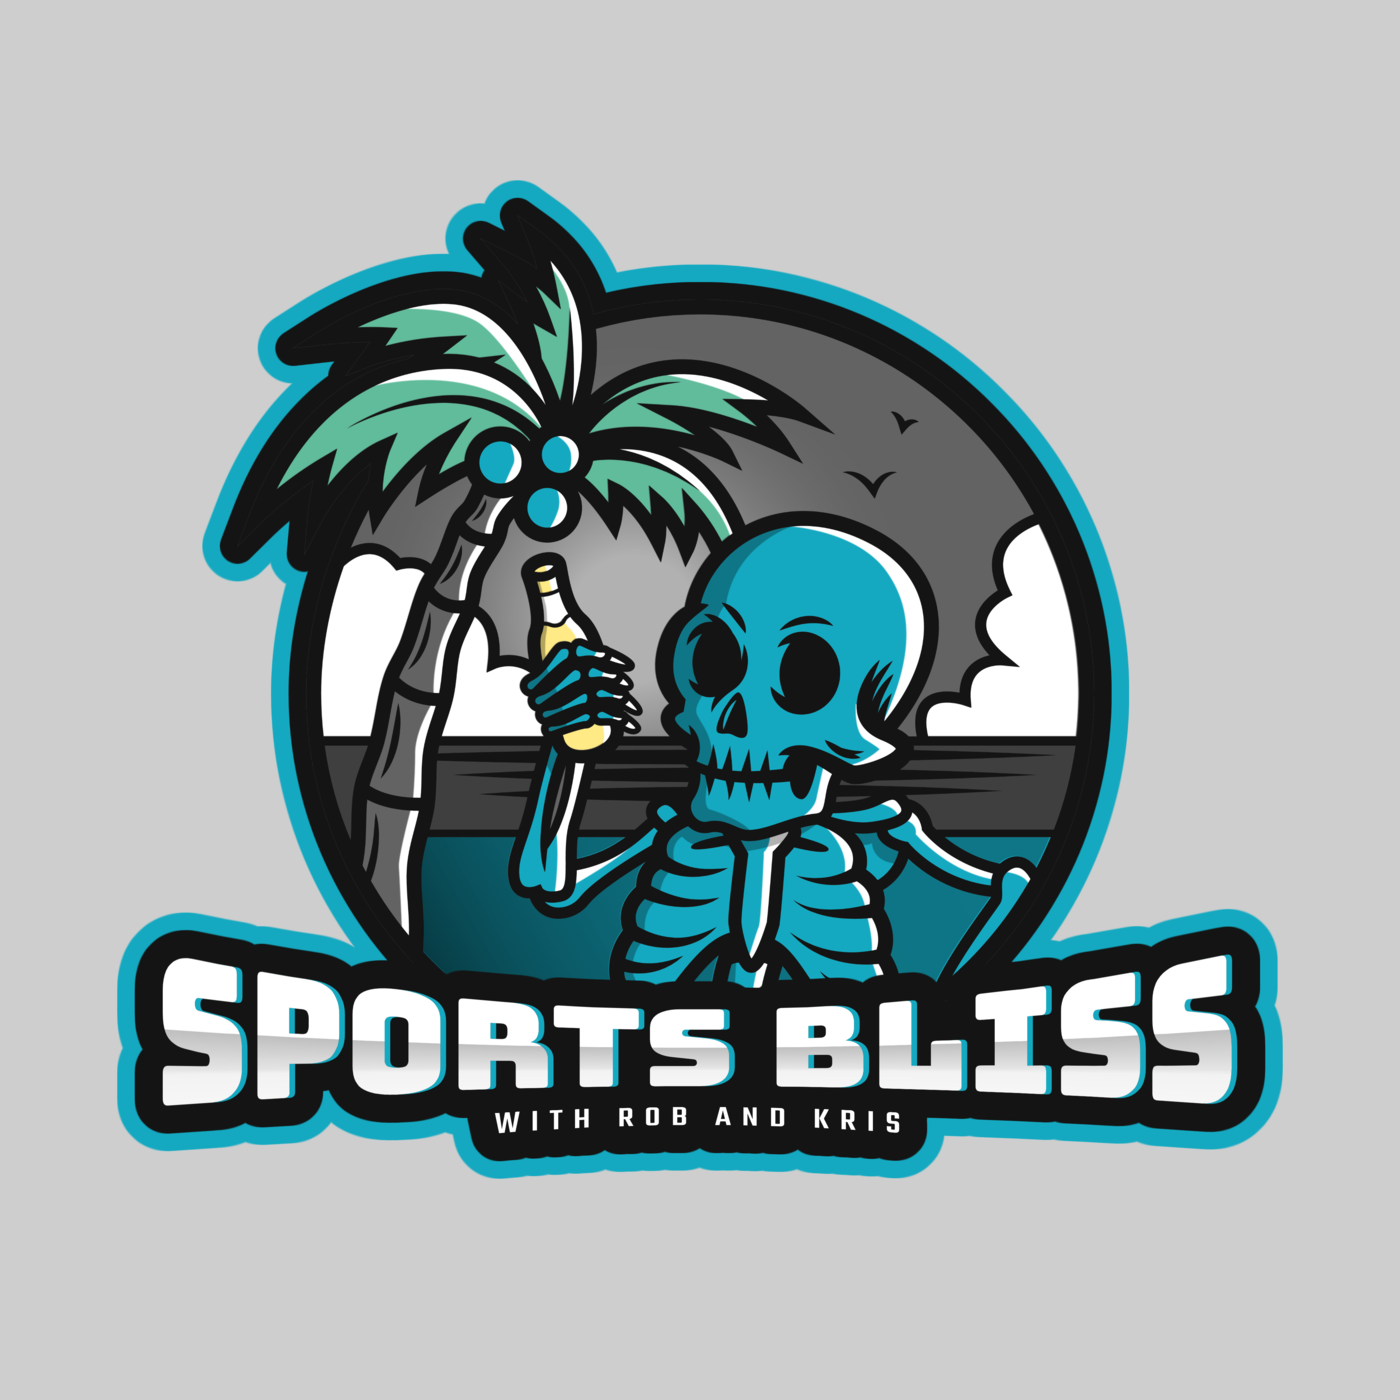 Sports Bliss with Rob and Kris Logo